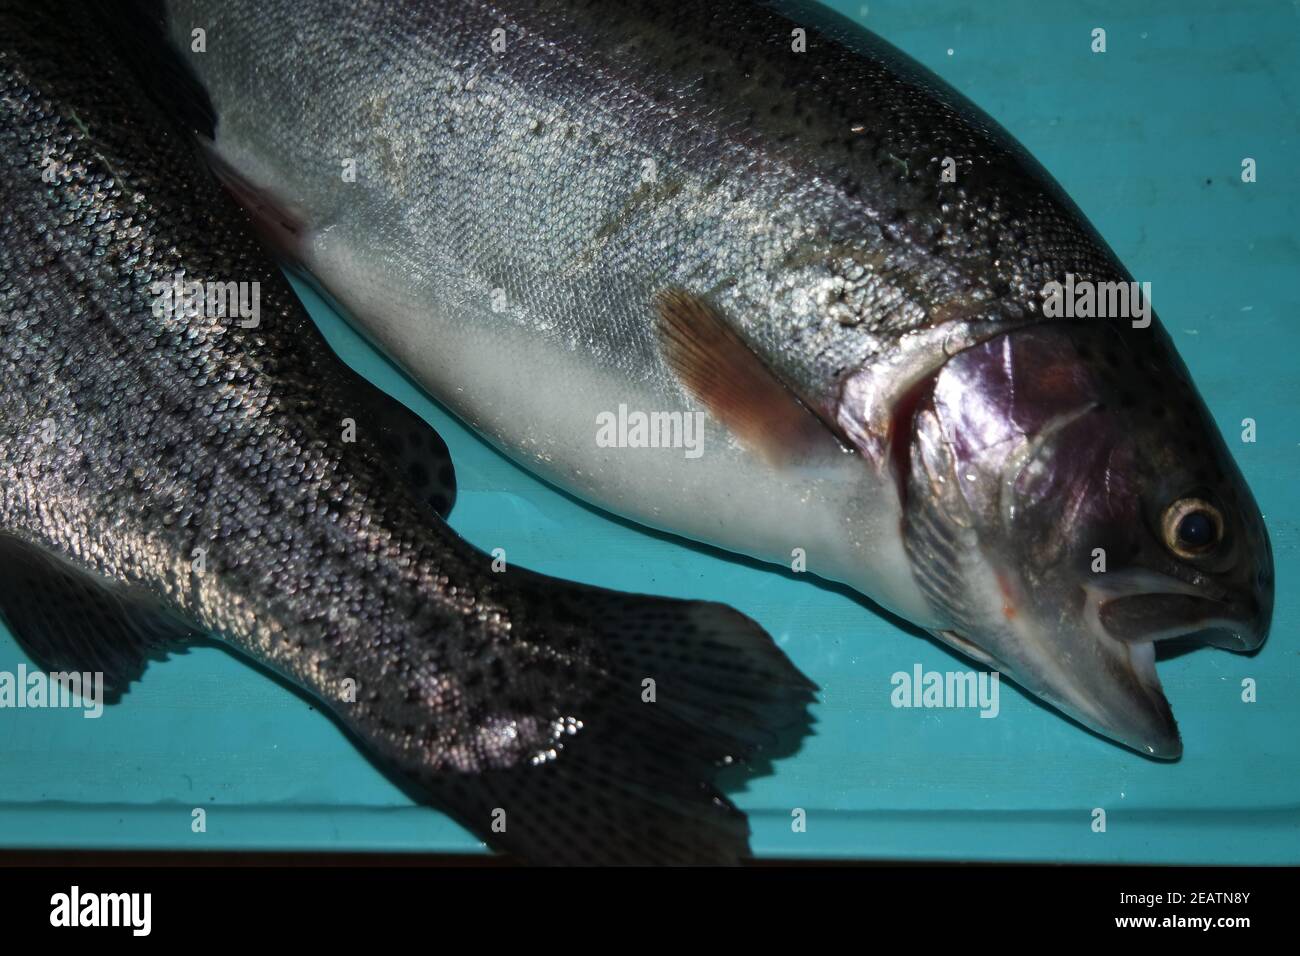 Fish closeup with a gray or grey and silver shiny skin scales Stock Photo